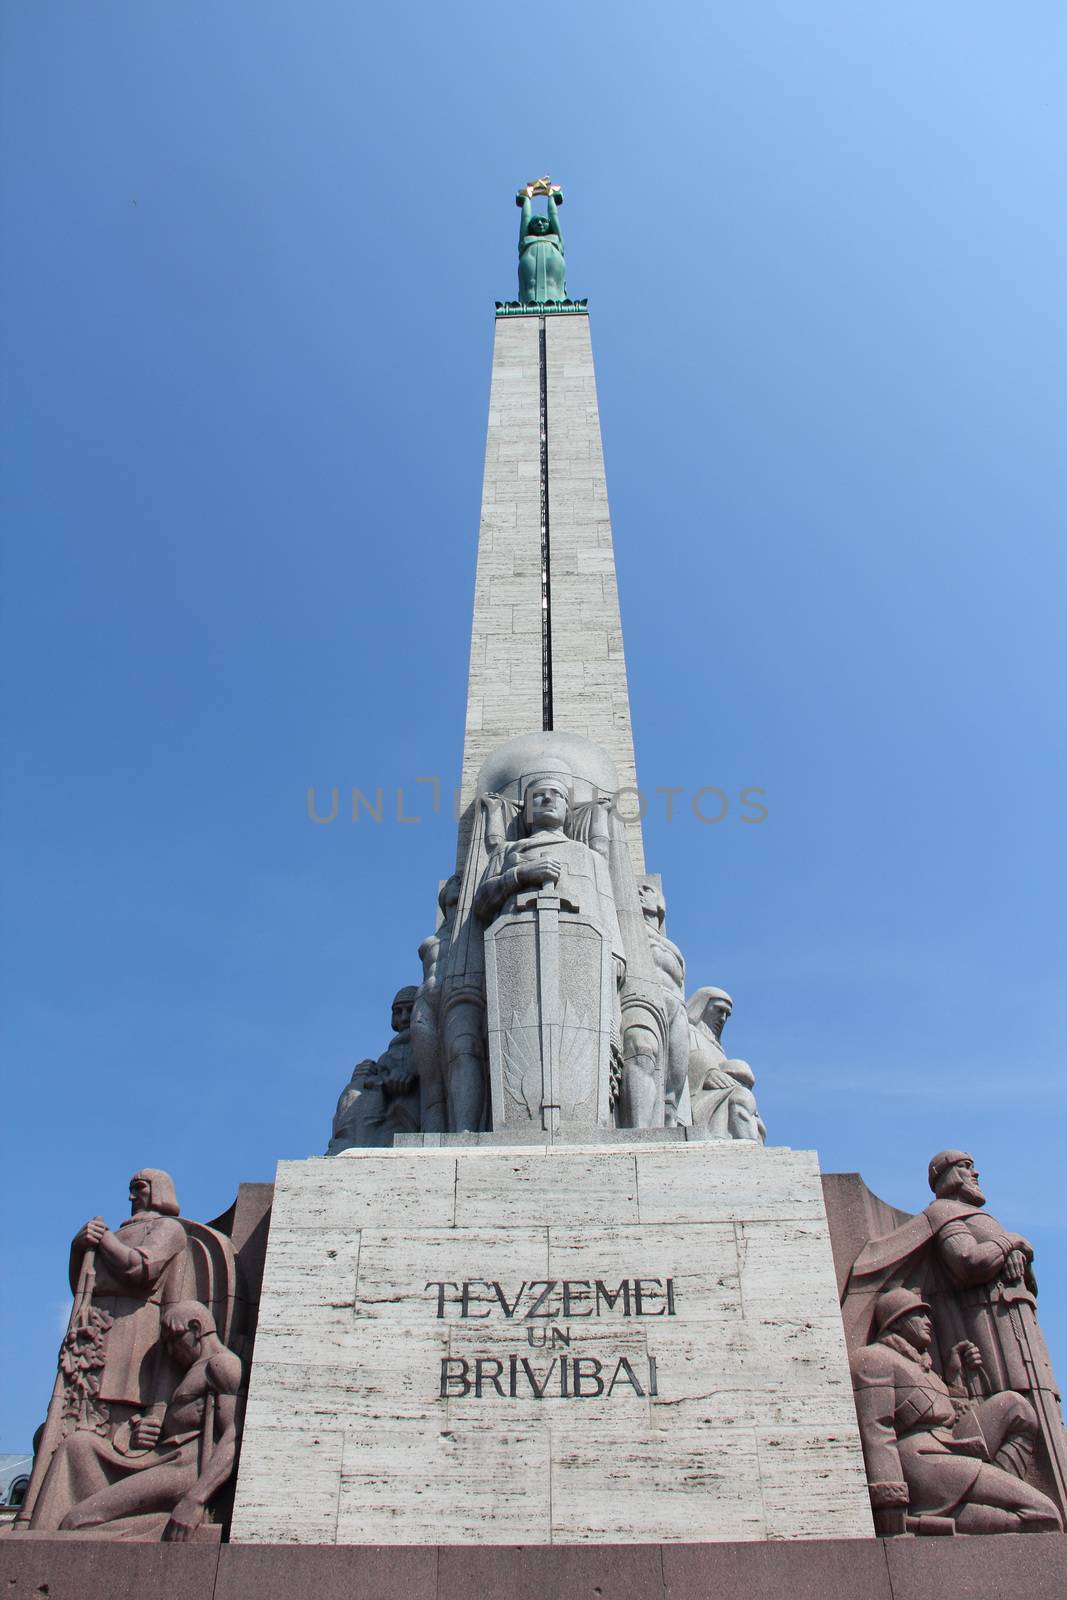 Freedom Monument with "For Fatherland and Freedom" inscription, Riga, Latvia